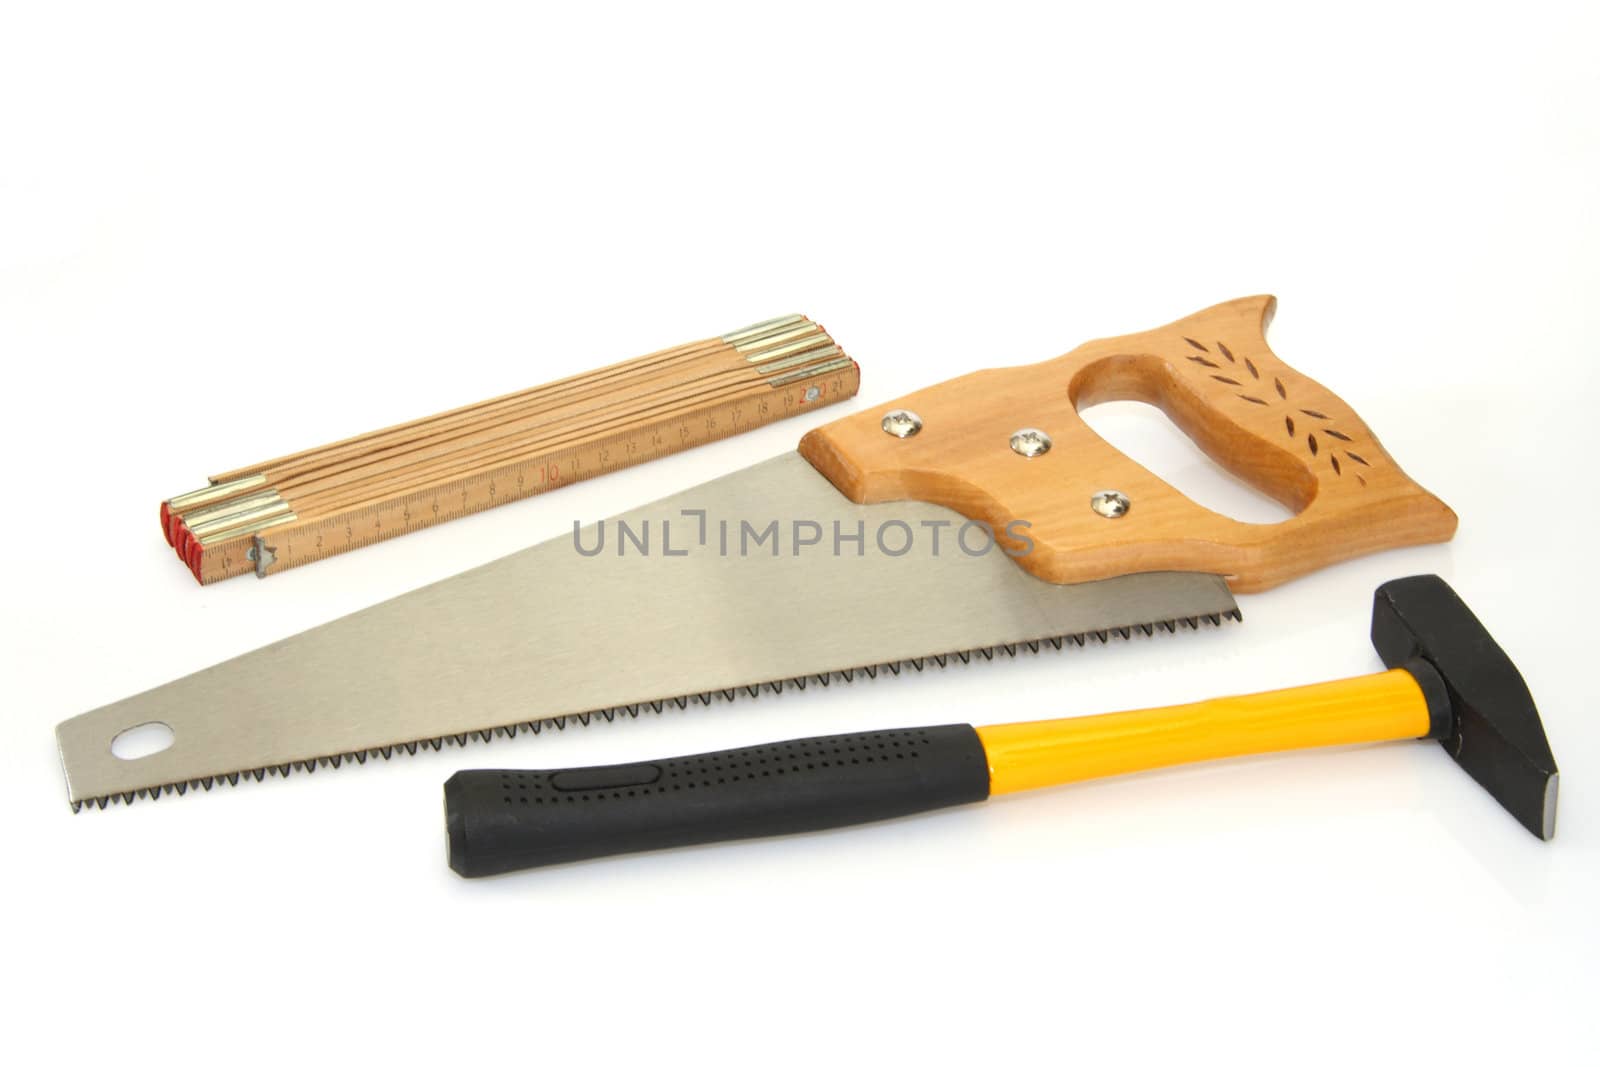 Tools on bright background. Shot in studio.